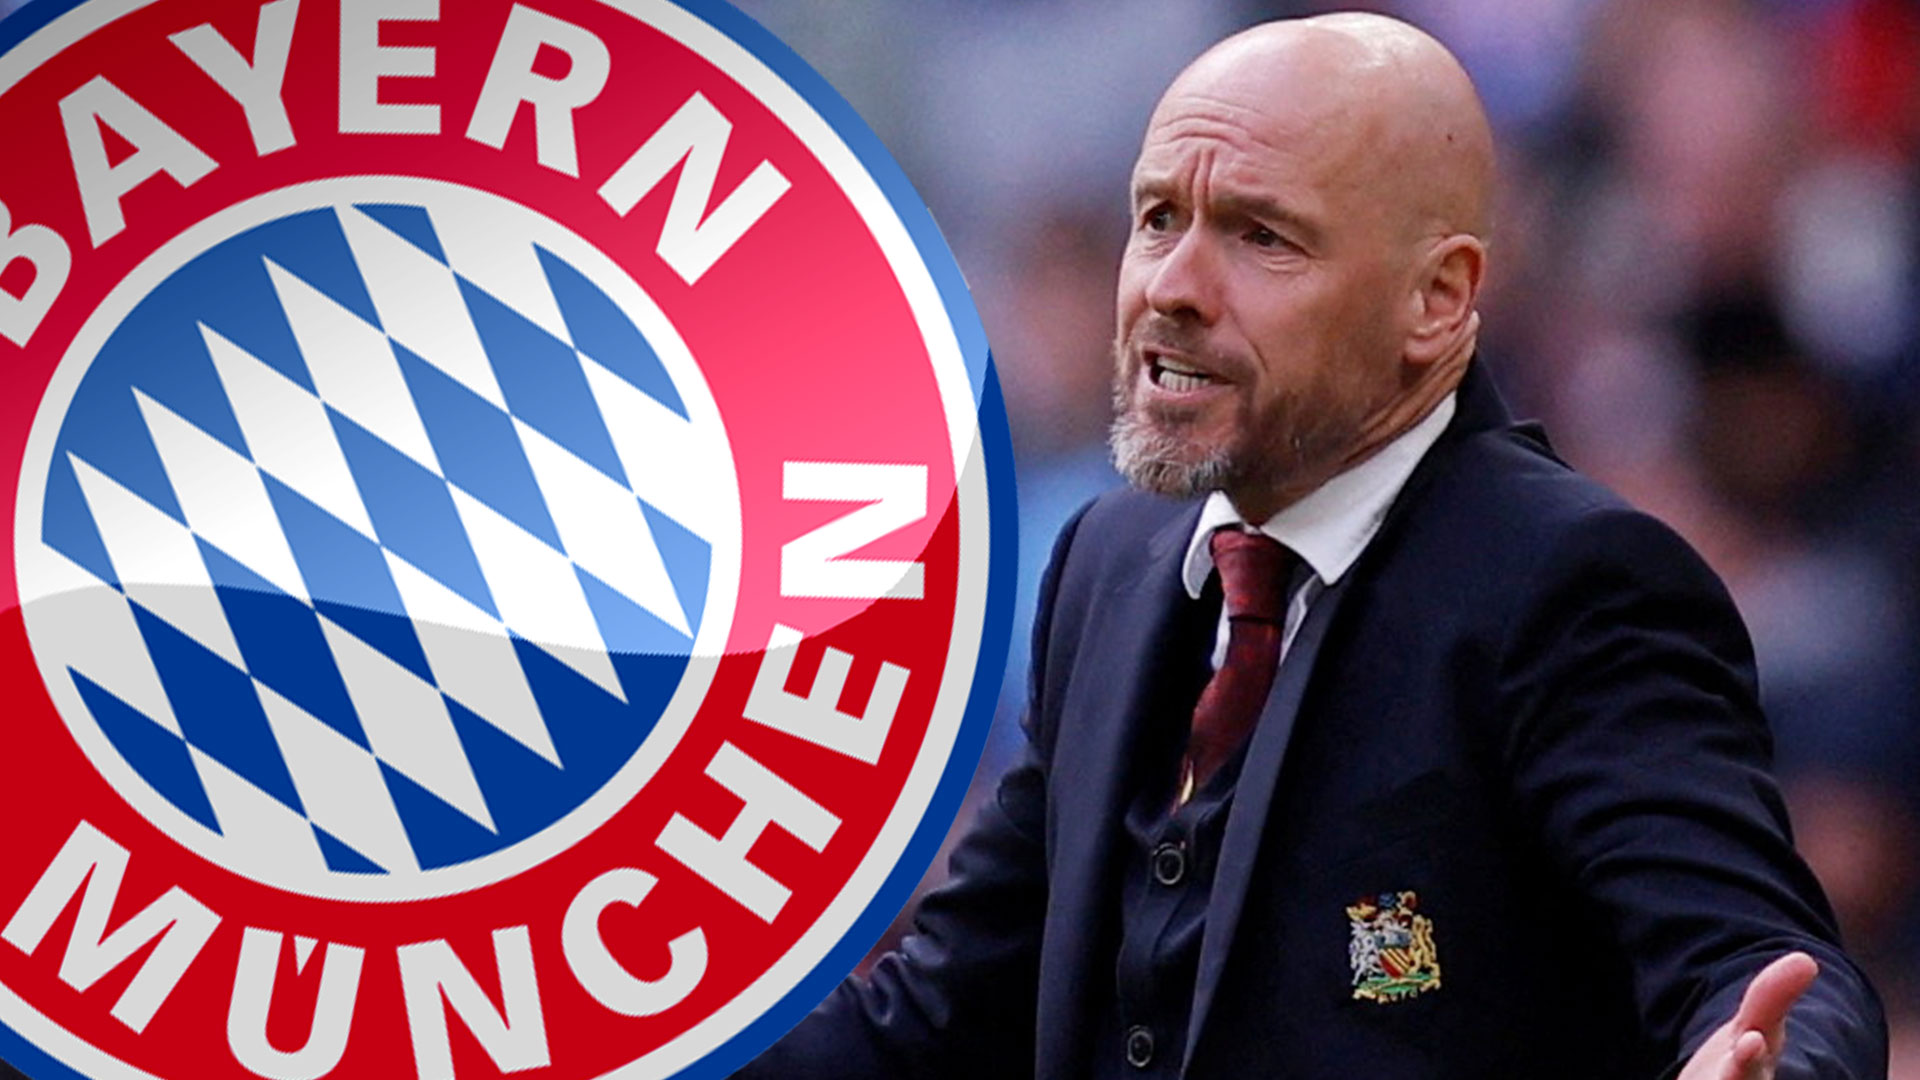 Erik ten Hag ‘on three-man shortlist to become next Bayern Munich manager’ as Man Utd line up his replacement [Video]